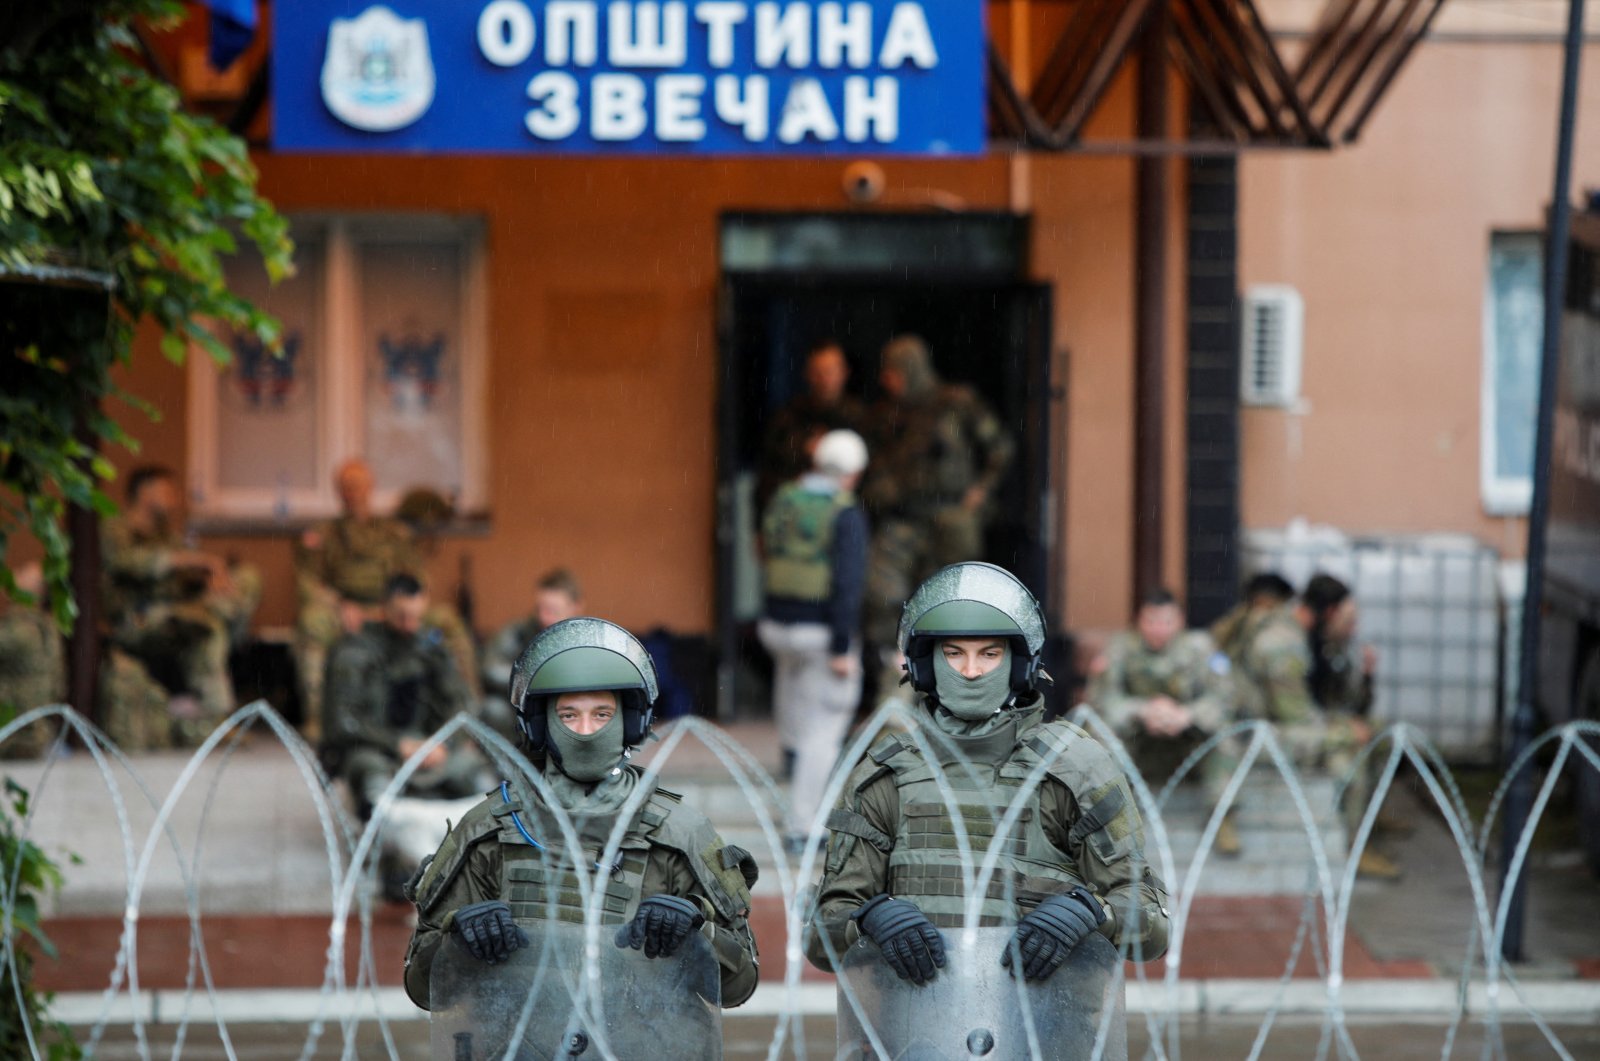 Members of the NATO-led Kosovo Force (KFOR) stand guard in Zvecan, Kosovo, May 31, 2023. (Reuters Photo)